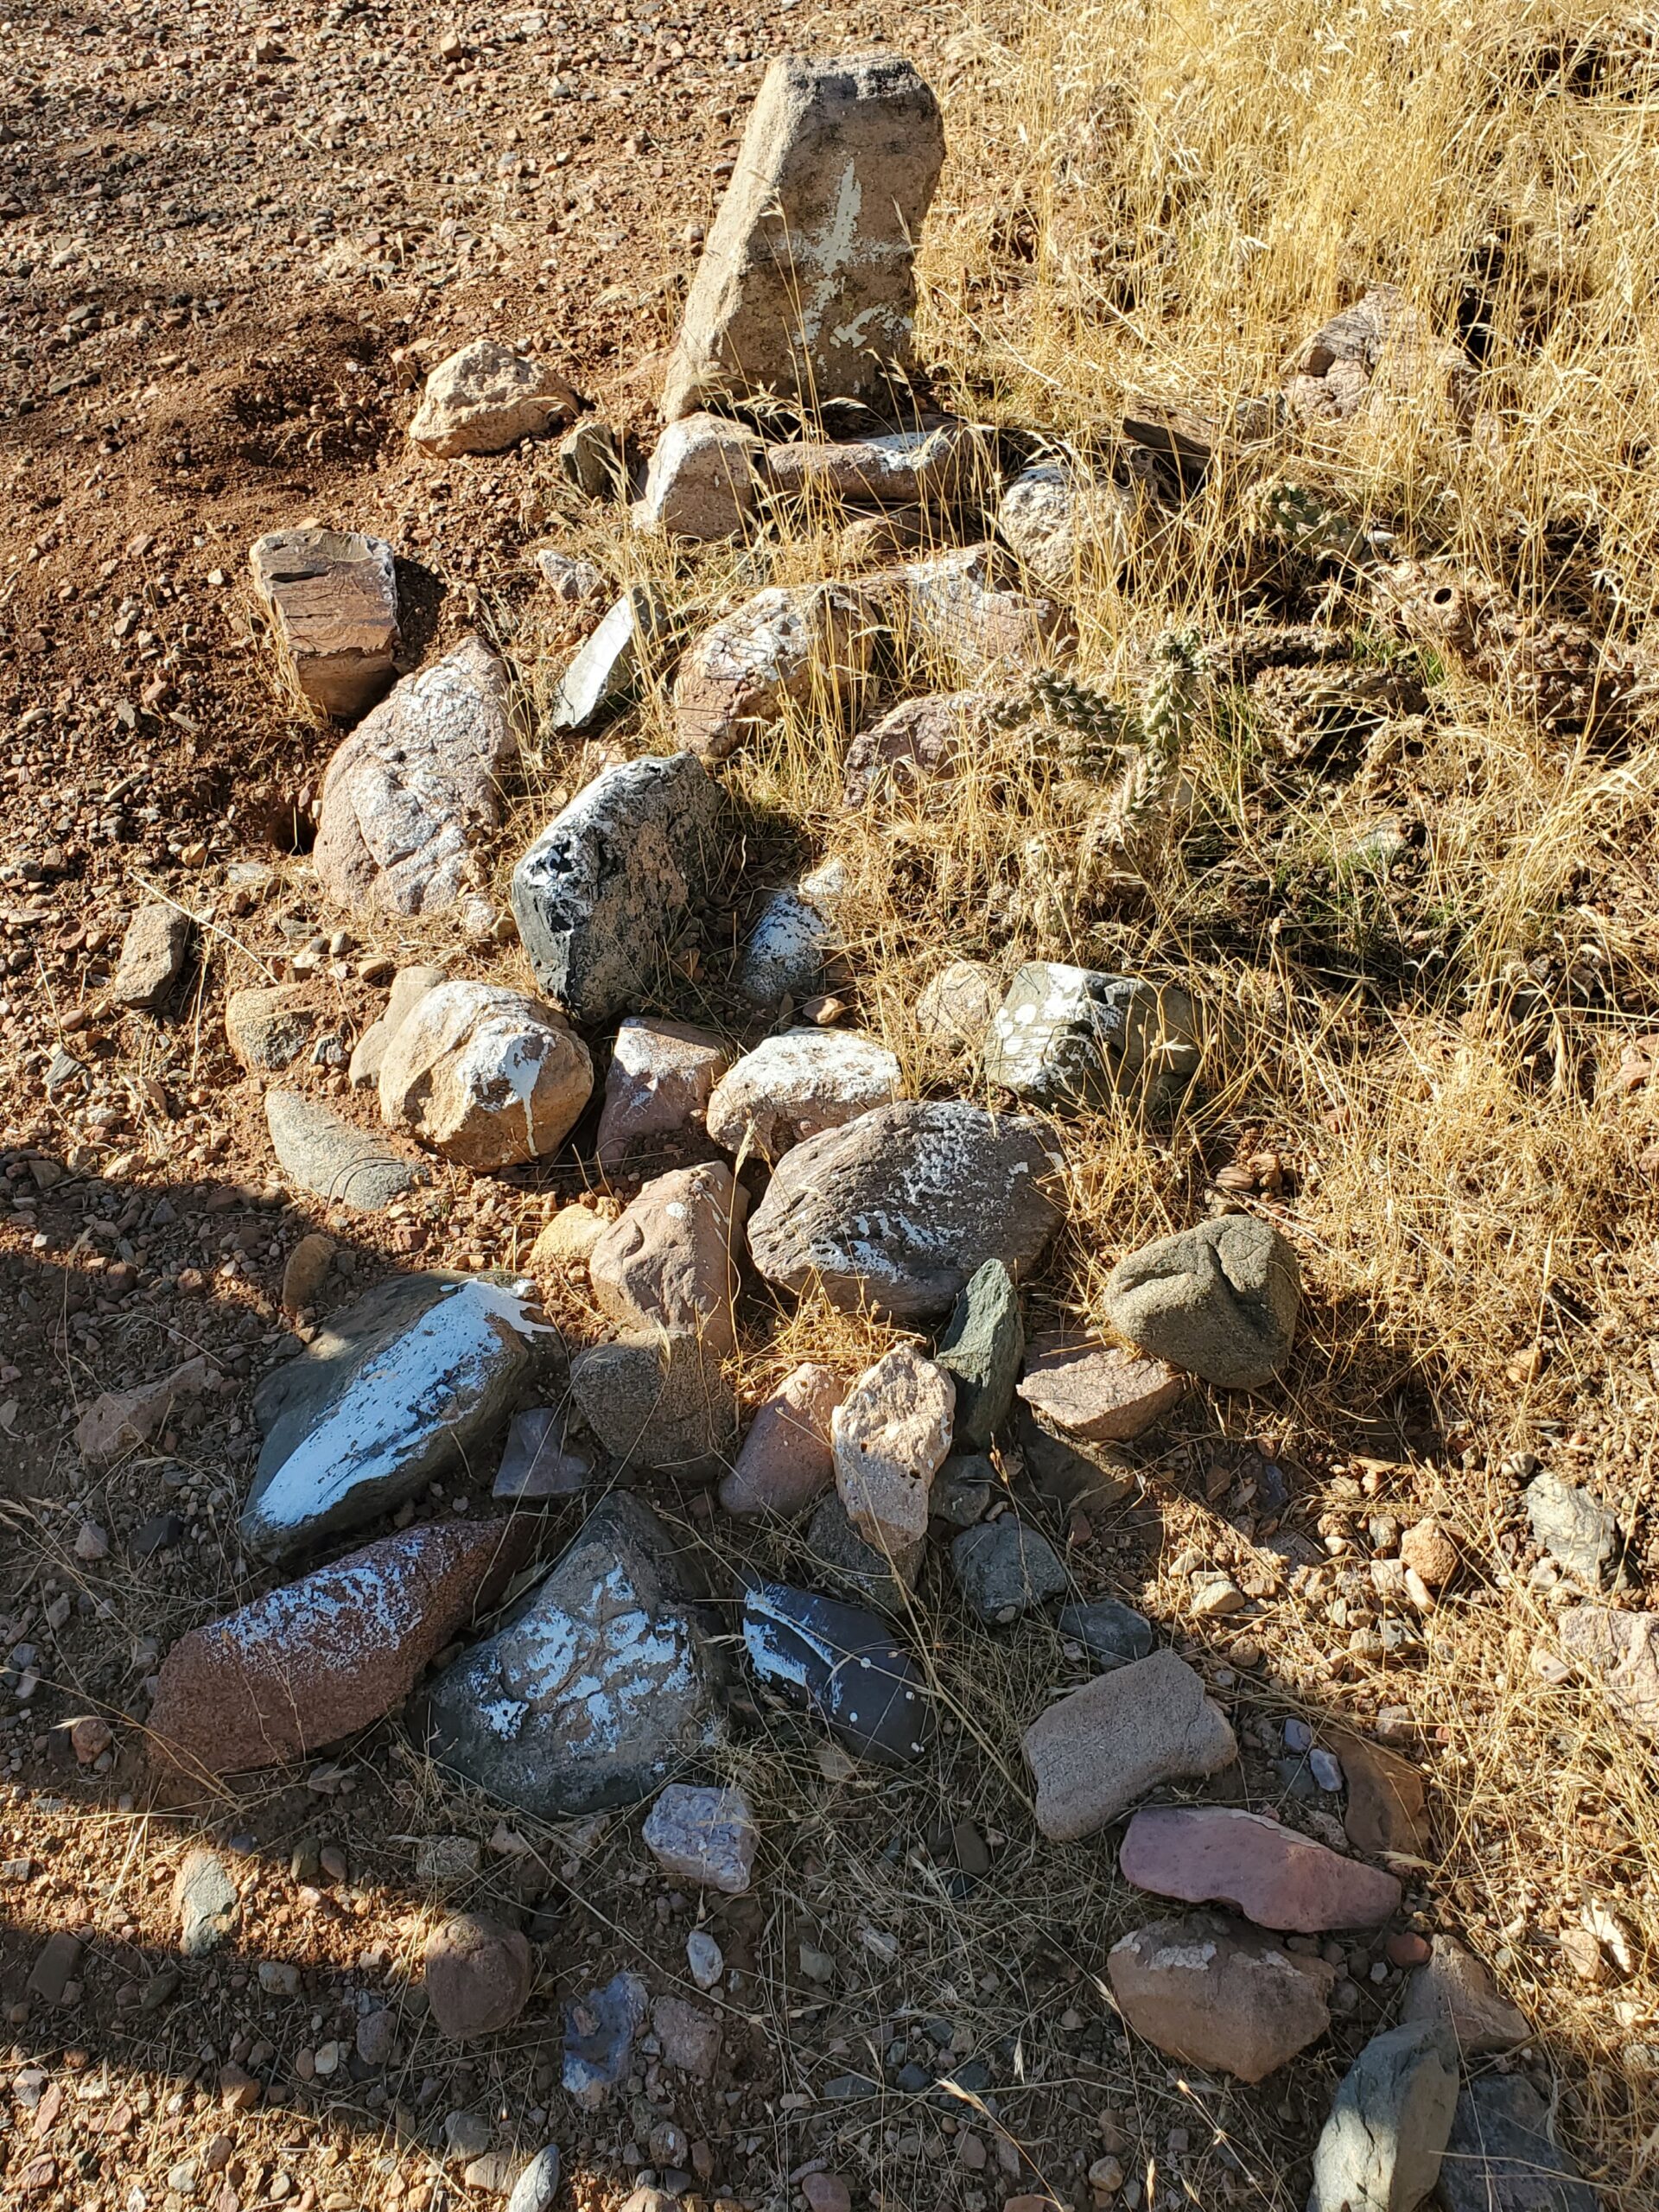 One of the graves at Historic Pinal